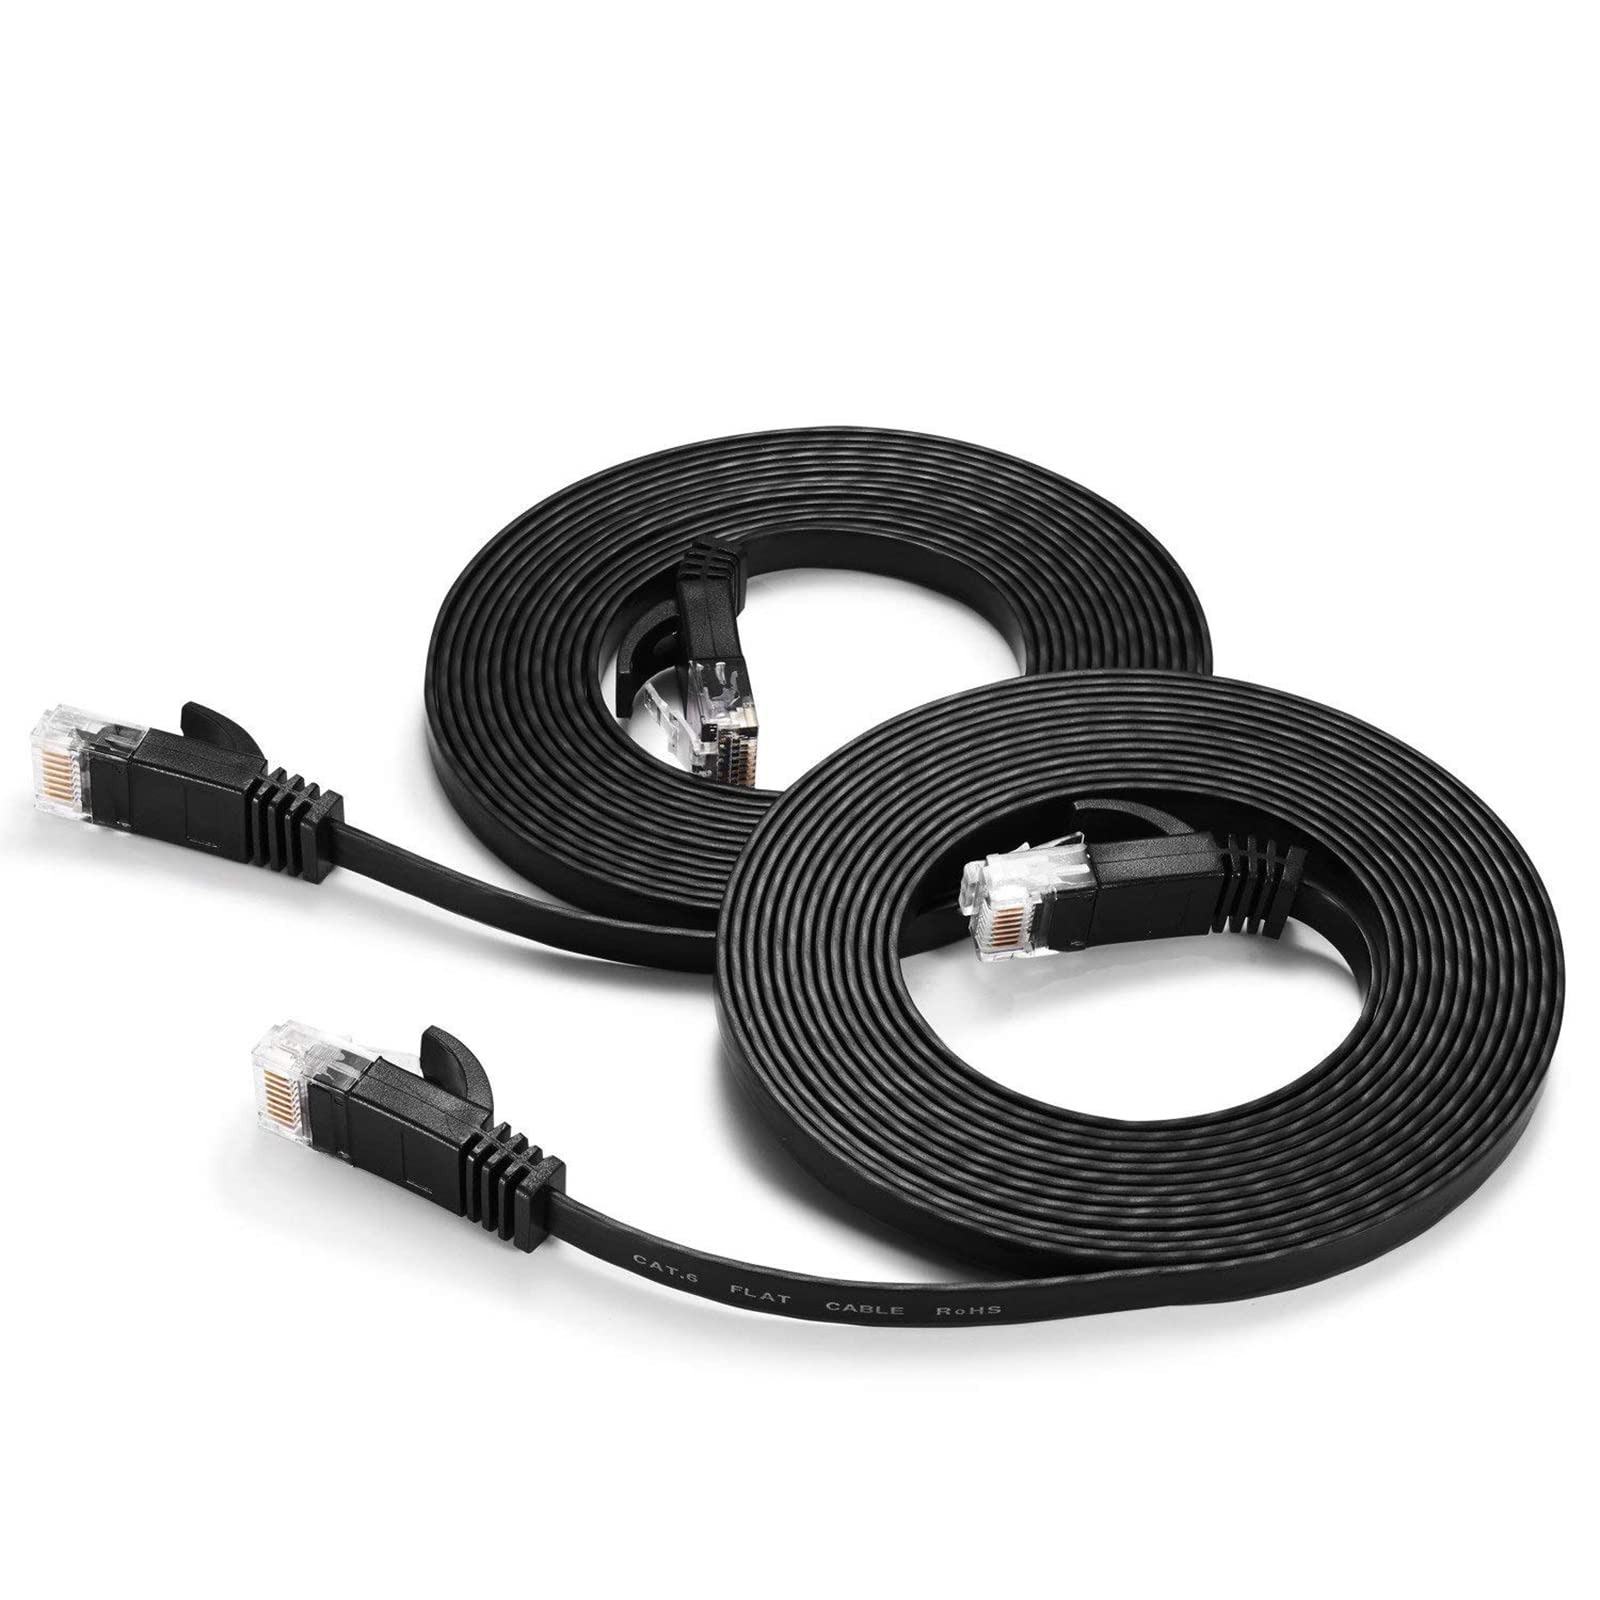 Book Cover Cat6 Ethernet Cable 10 Ft (2Pack), Outdoor&Indoor, 10Gbps Support Cat7 Network, Heavy Duty Flat LAN Internet Patch Cord, Solid Weatherproof High Speed Cable for Router, Modem, Xbox, PS4, Switch, Black 10ft-2Pack Black